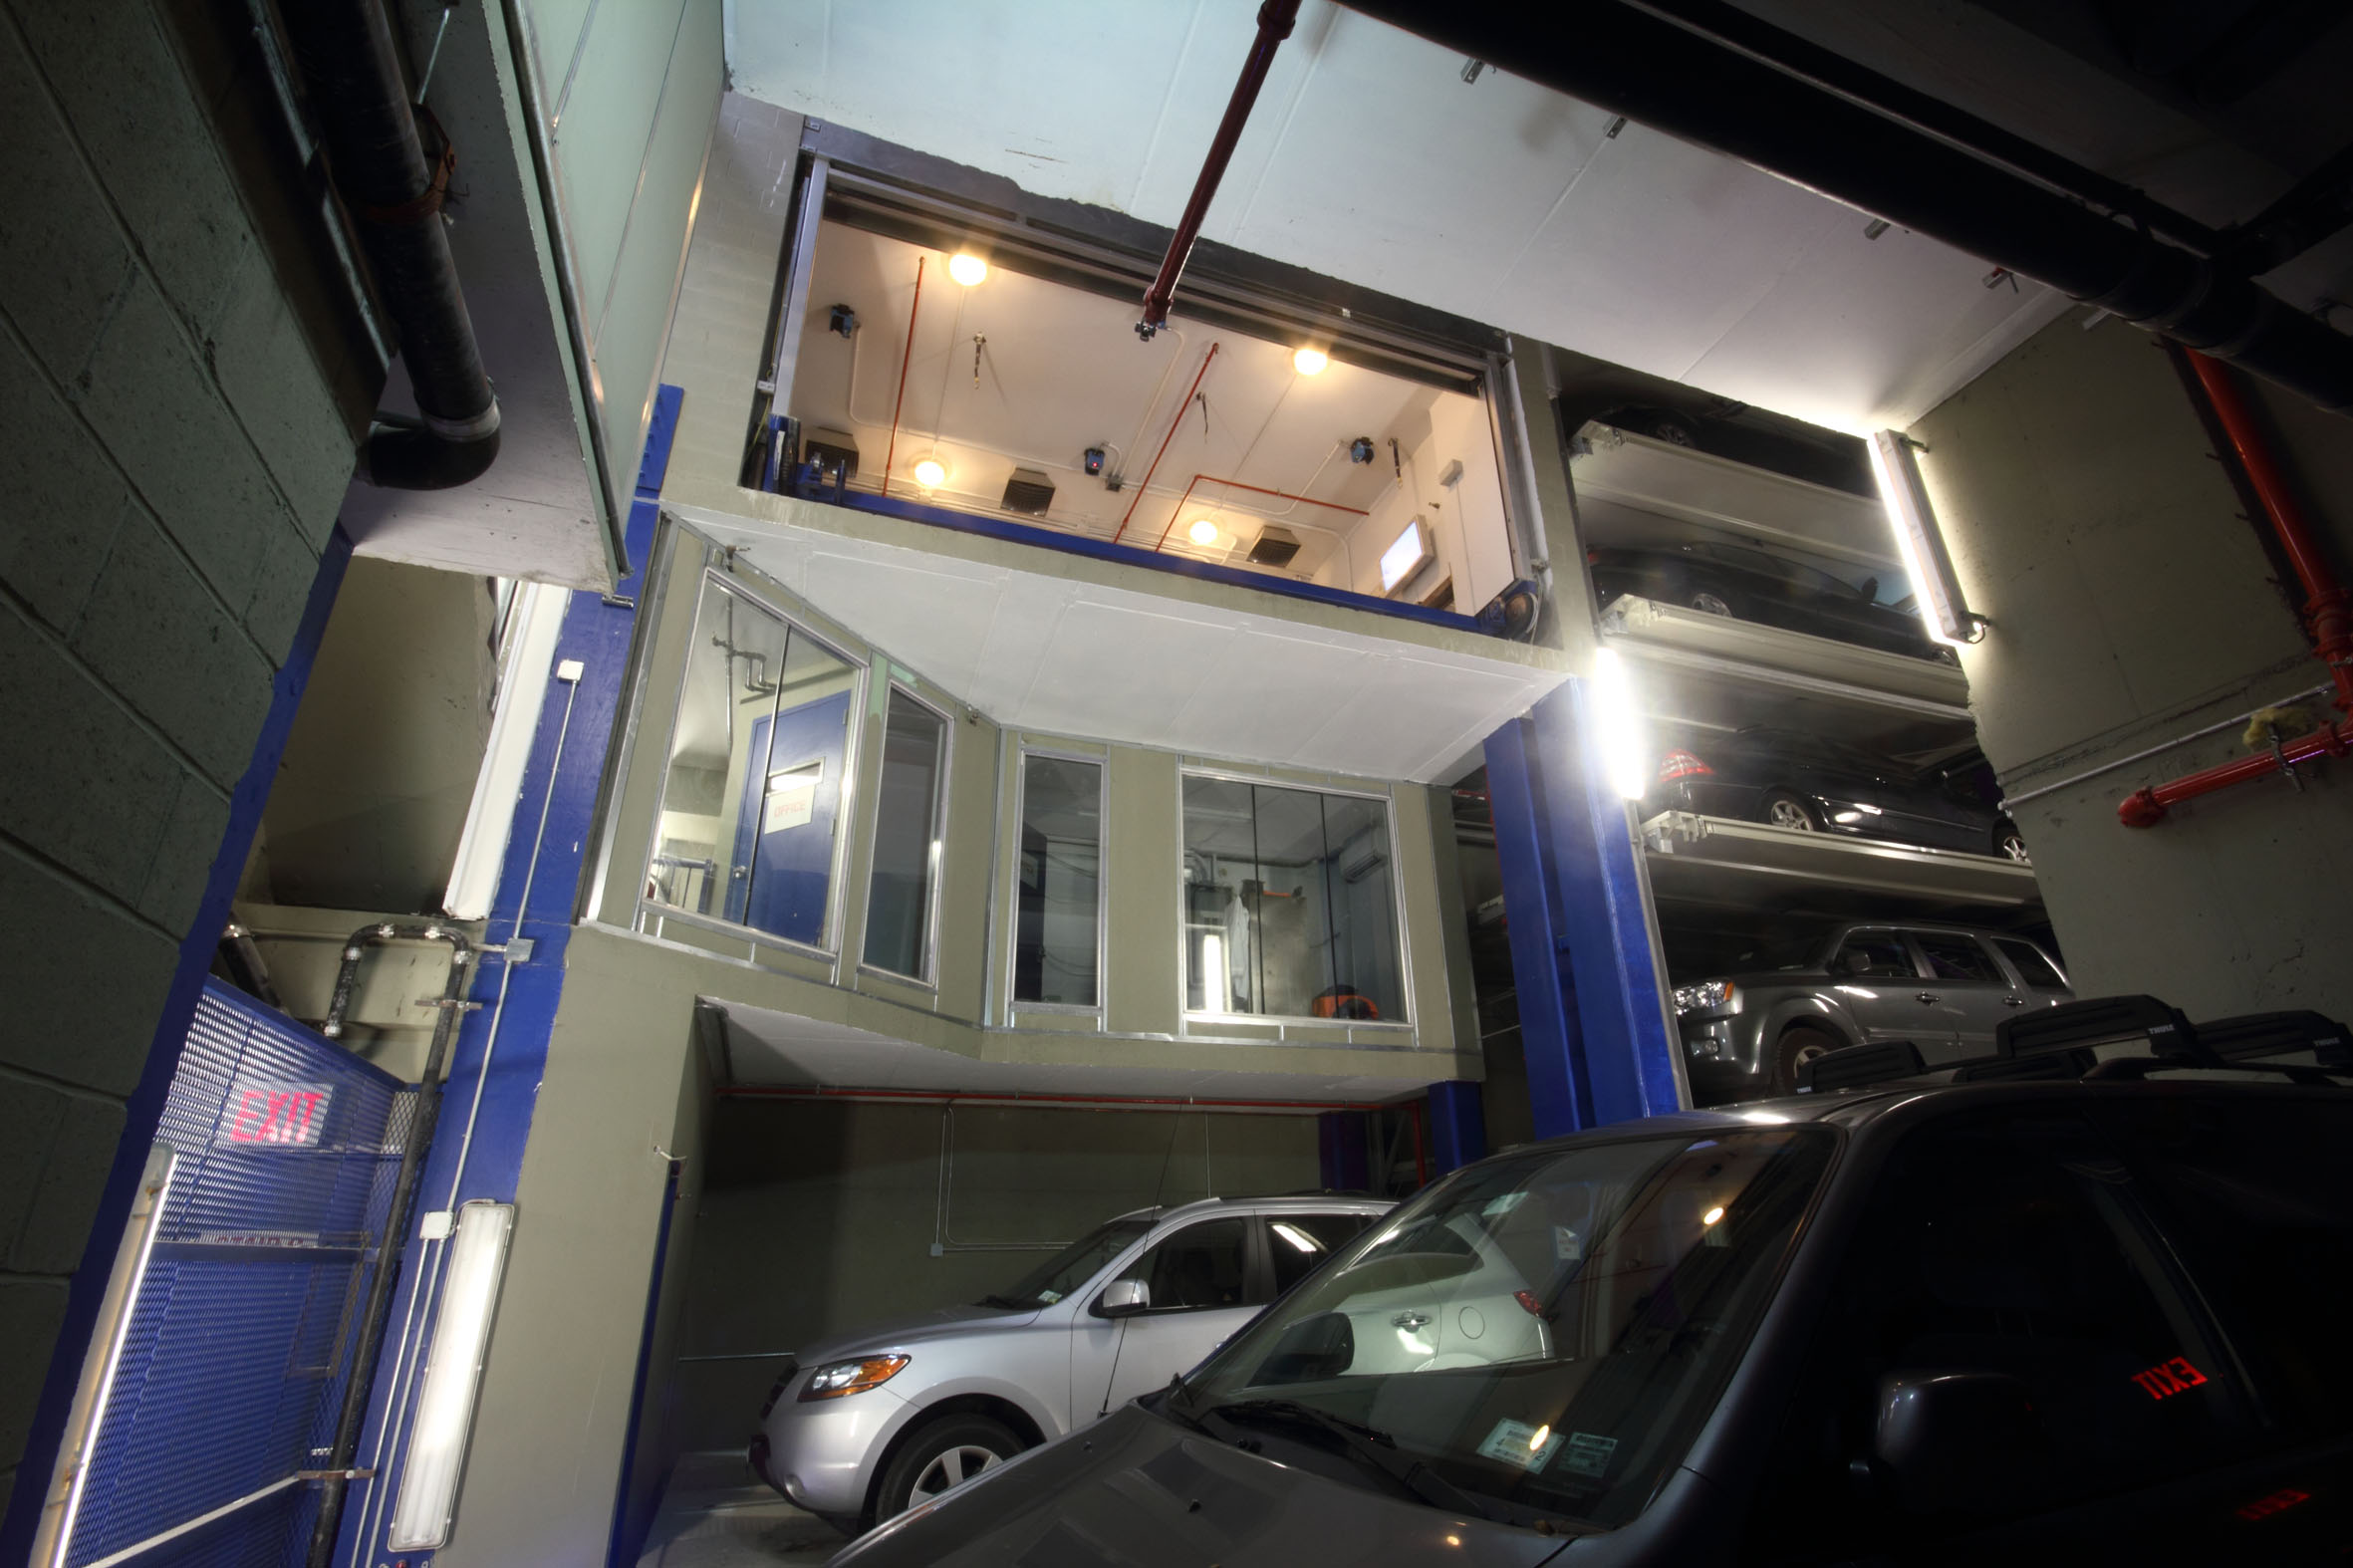 Safe and secure Access to the stolzer automated parking system via transfer room